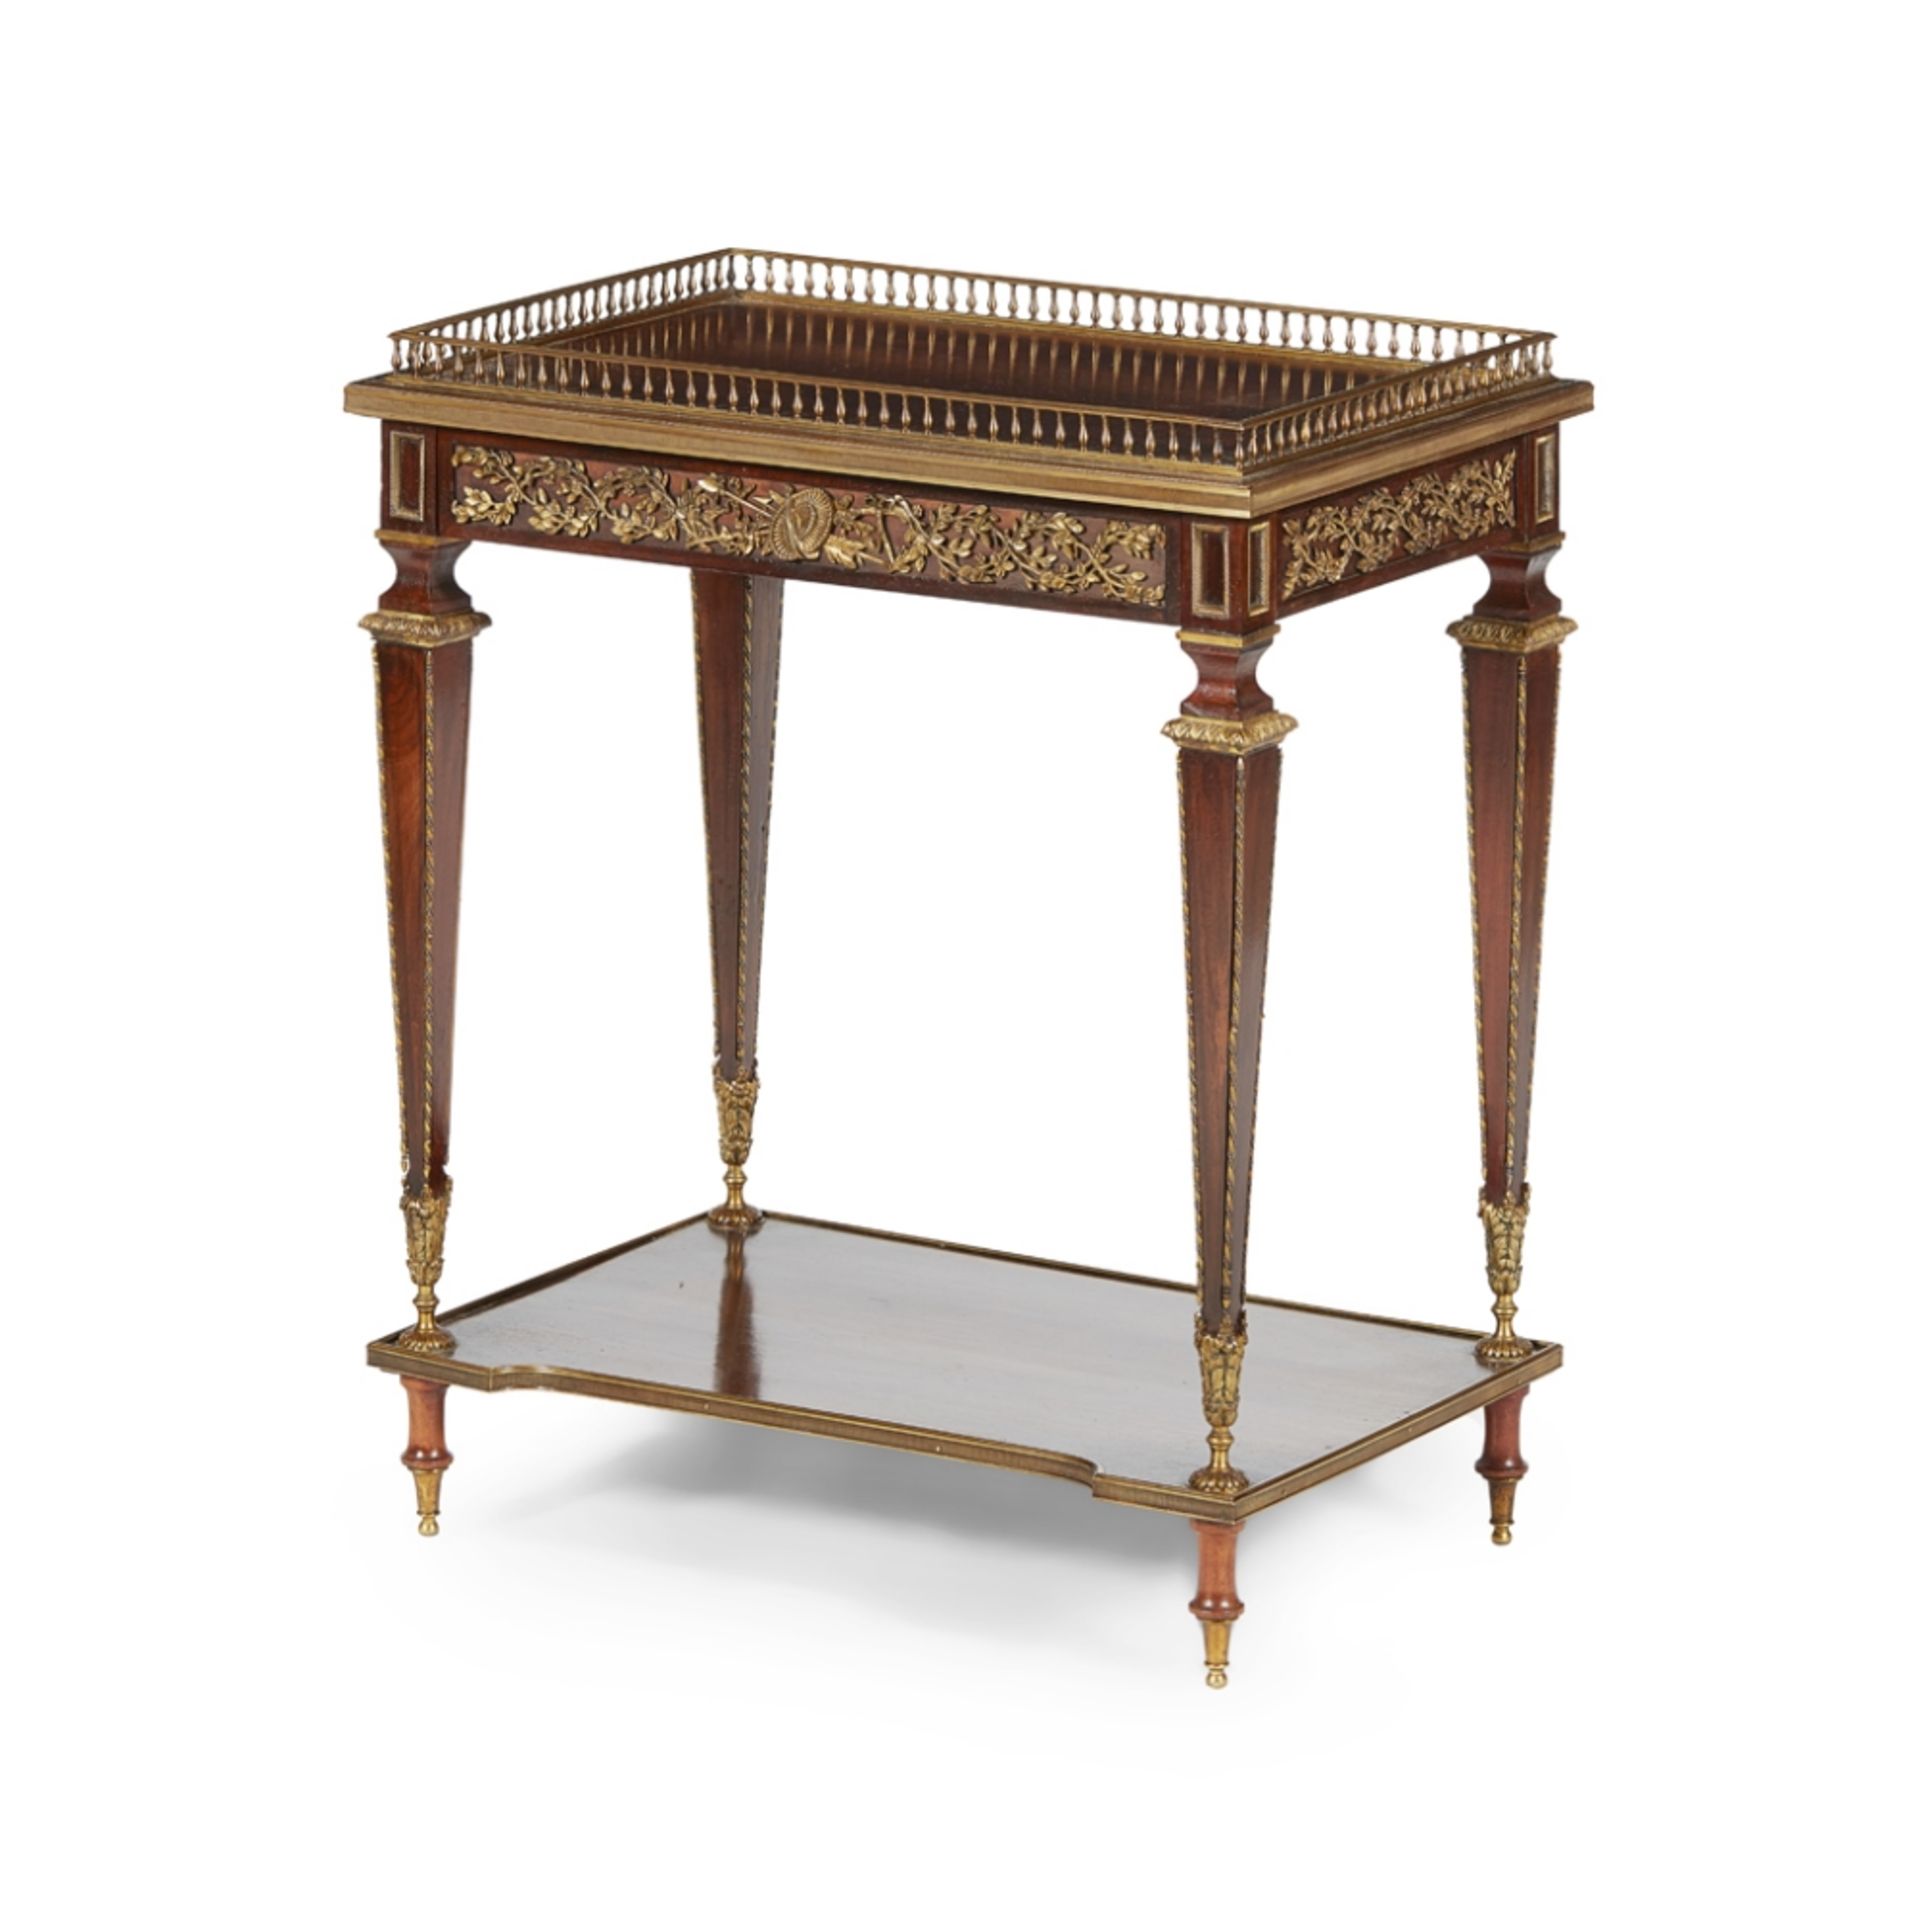 LOUIS XVI STYLE ROSEWOOD, GILT BRONZE AND BRASS MOUNTED OCCASIONAL TABLE, ATTRIBUTED TO HENRY DASSON